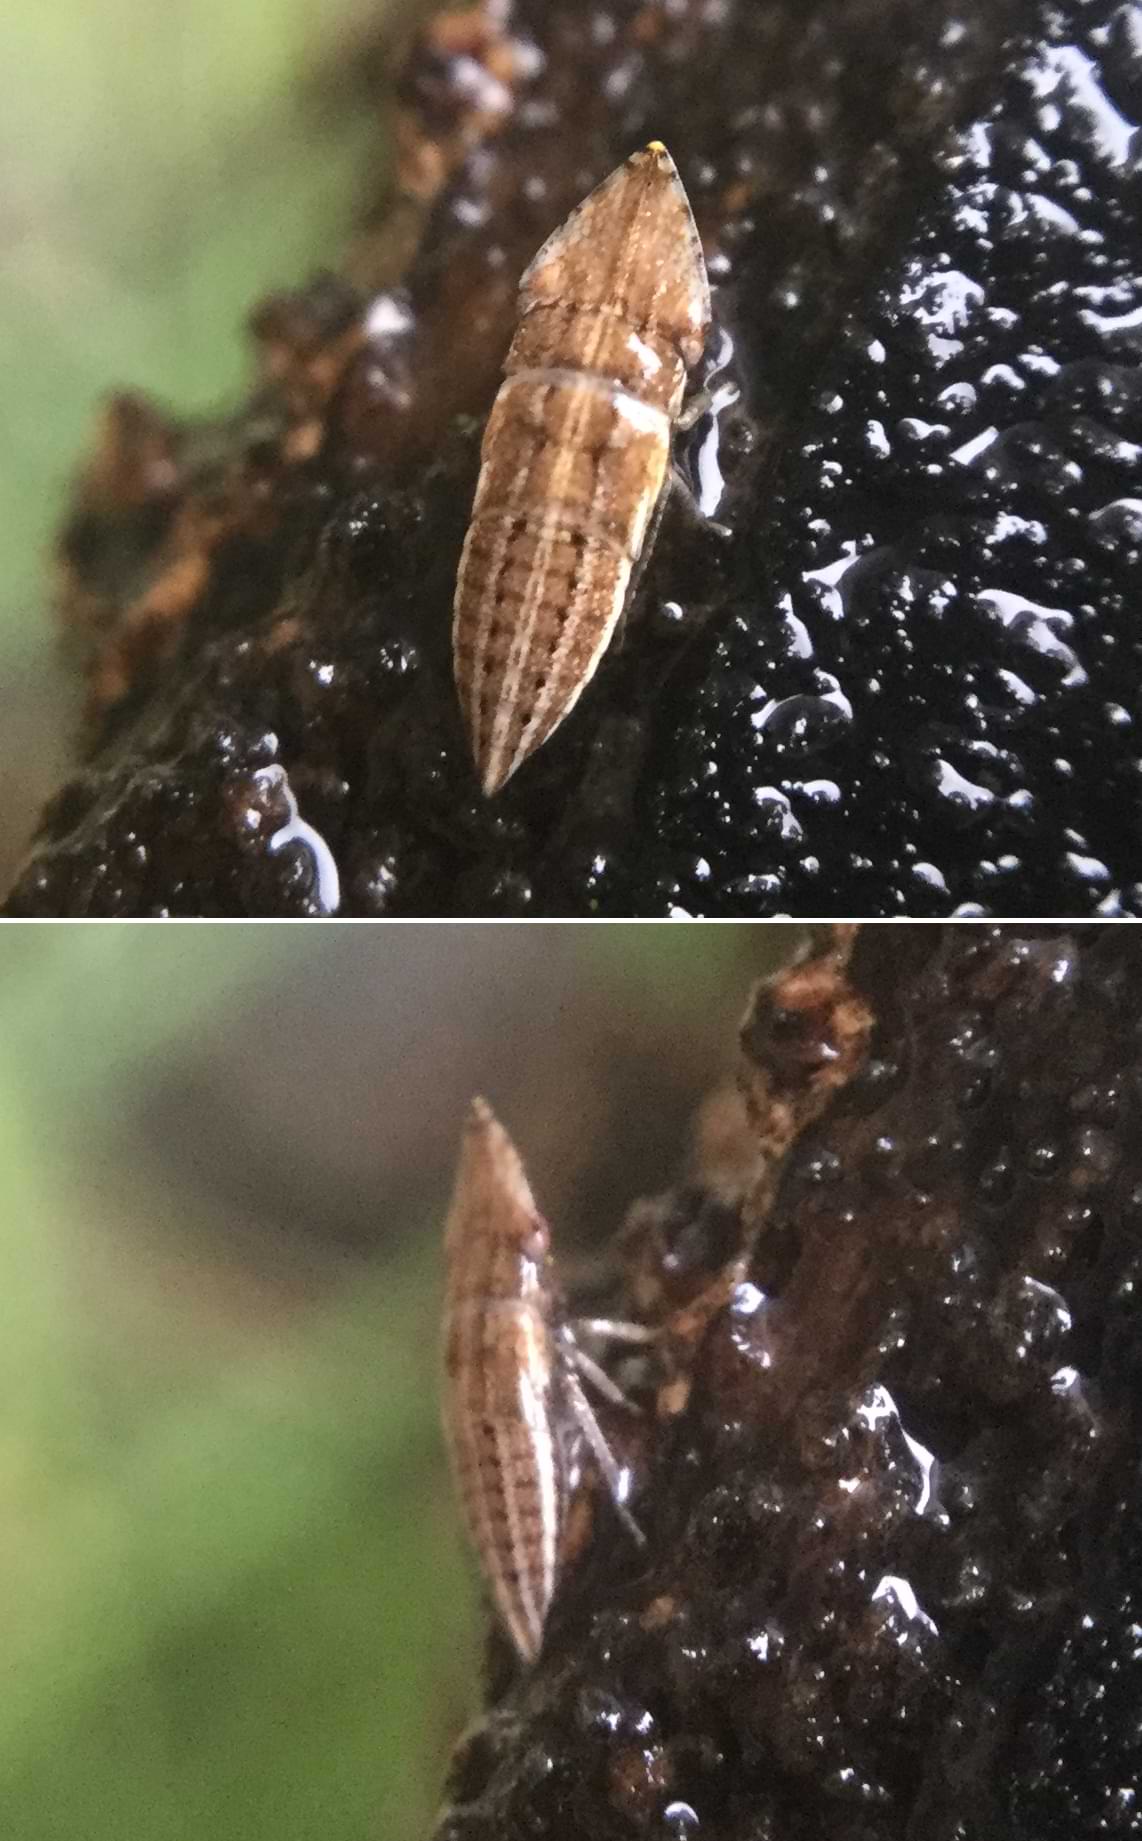 Two photos of a long angular bug on a very damp log. The second photo shows one of its eyes which look extremely silly.